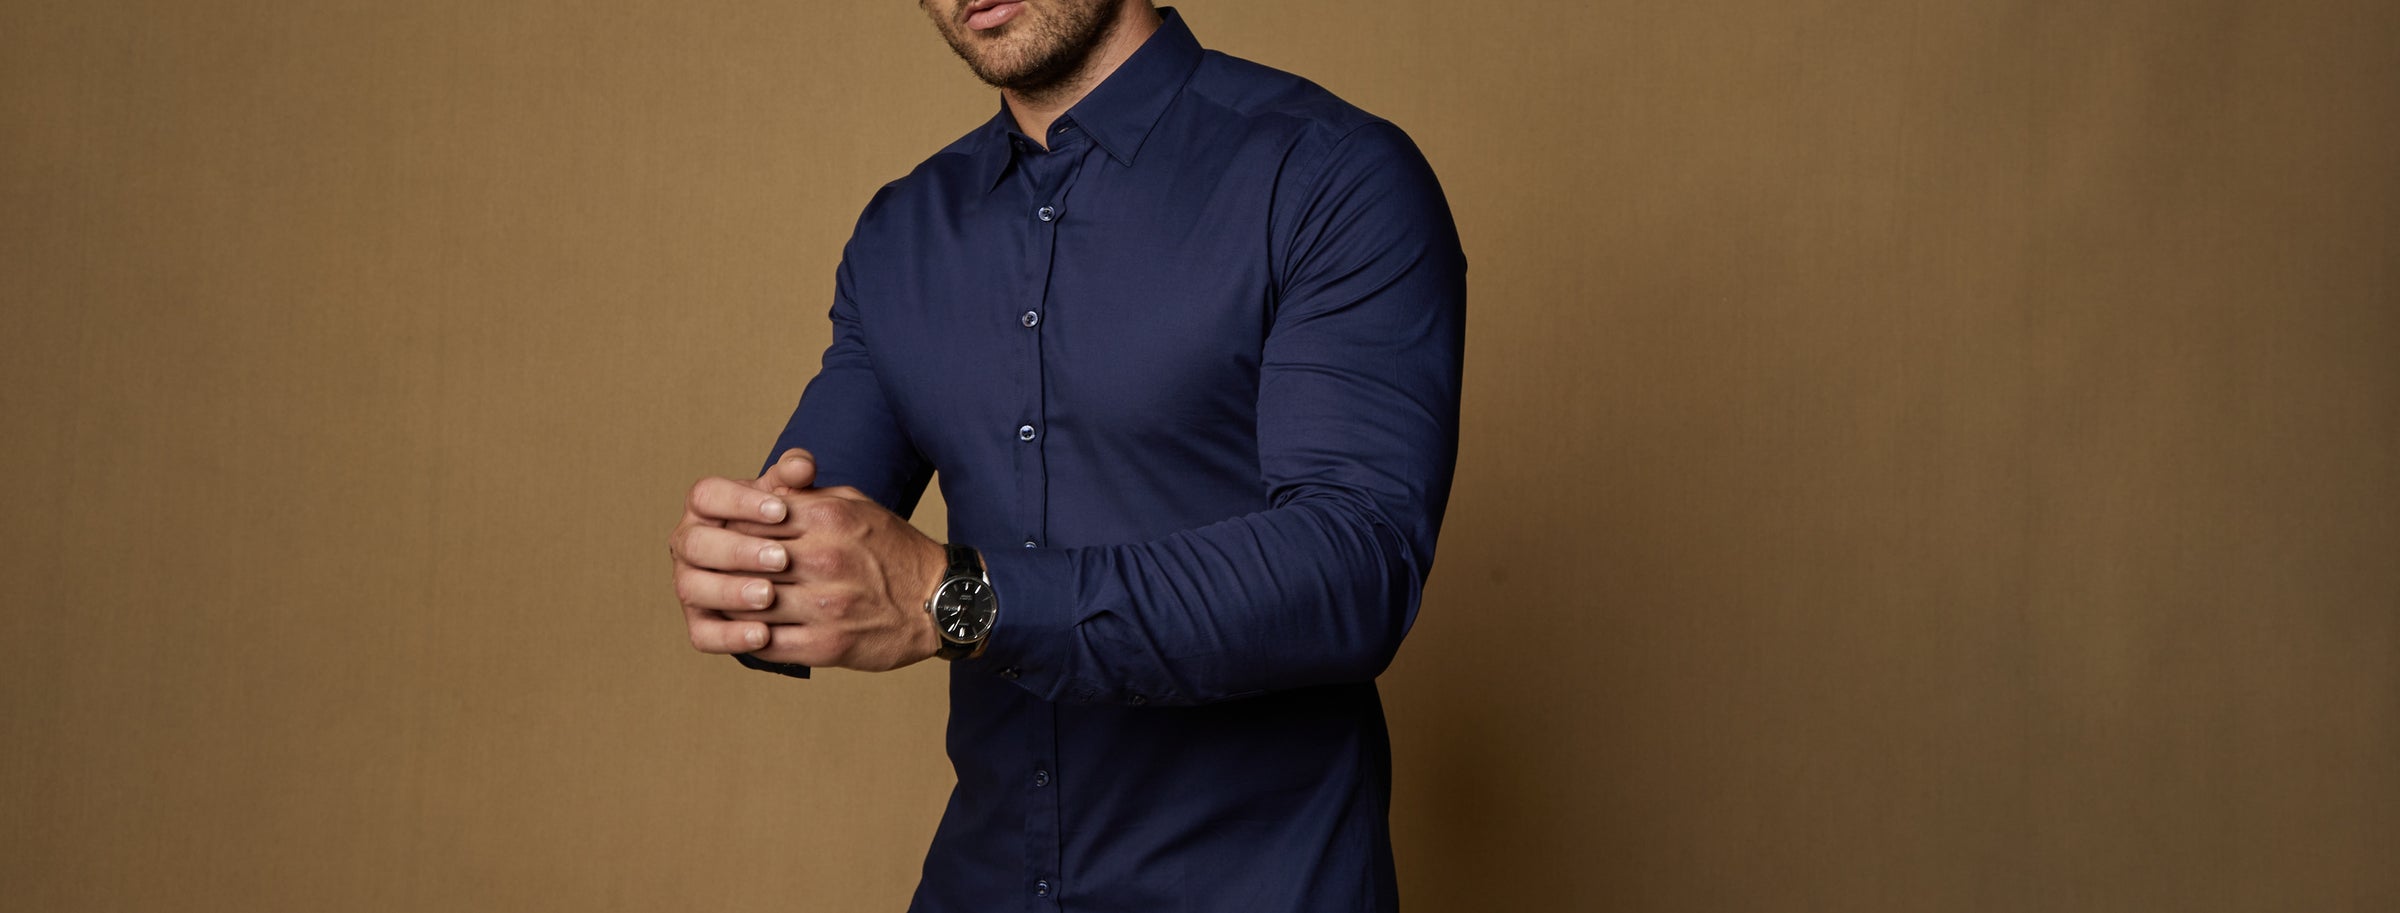 Dress Shirt Sizes  Tapered Menswear Size Guide